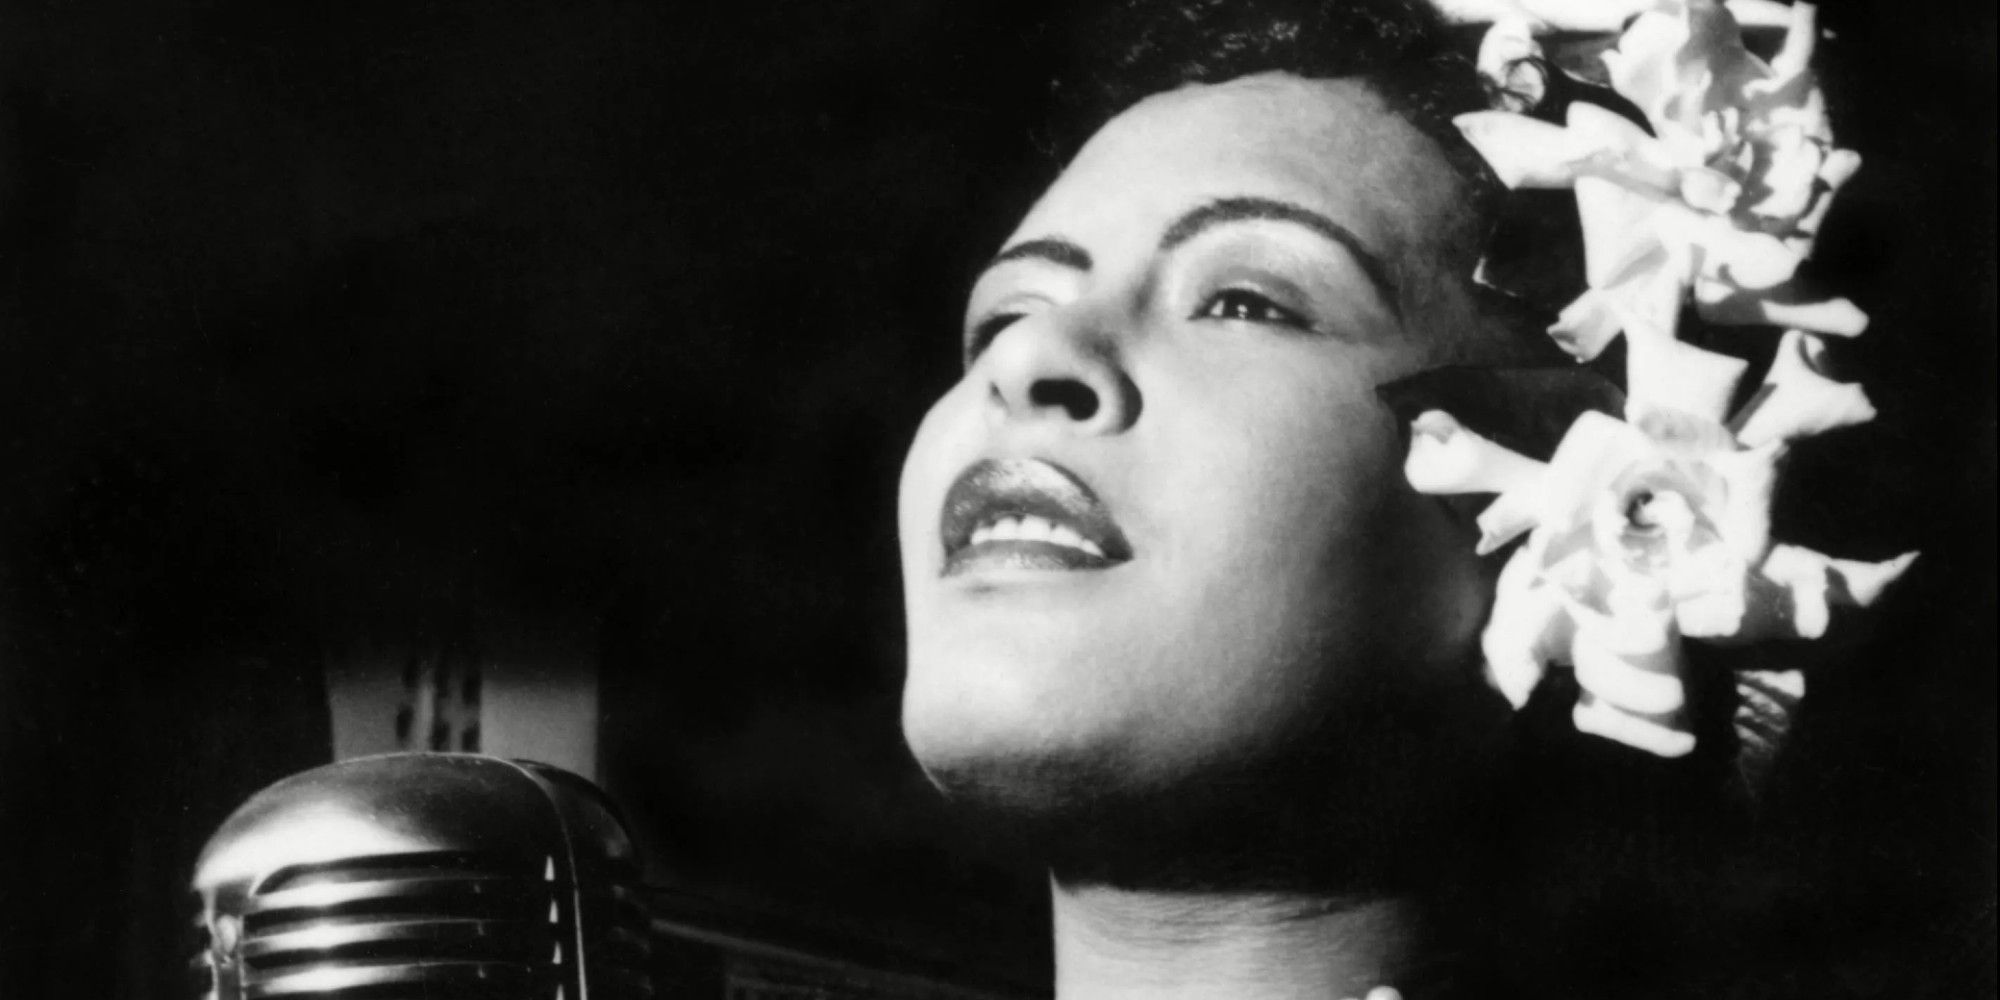 Billie Holiday singing into a microphone in black-and-white